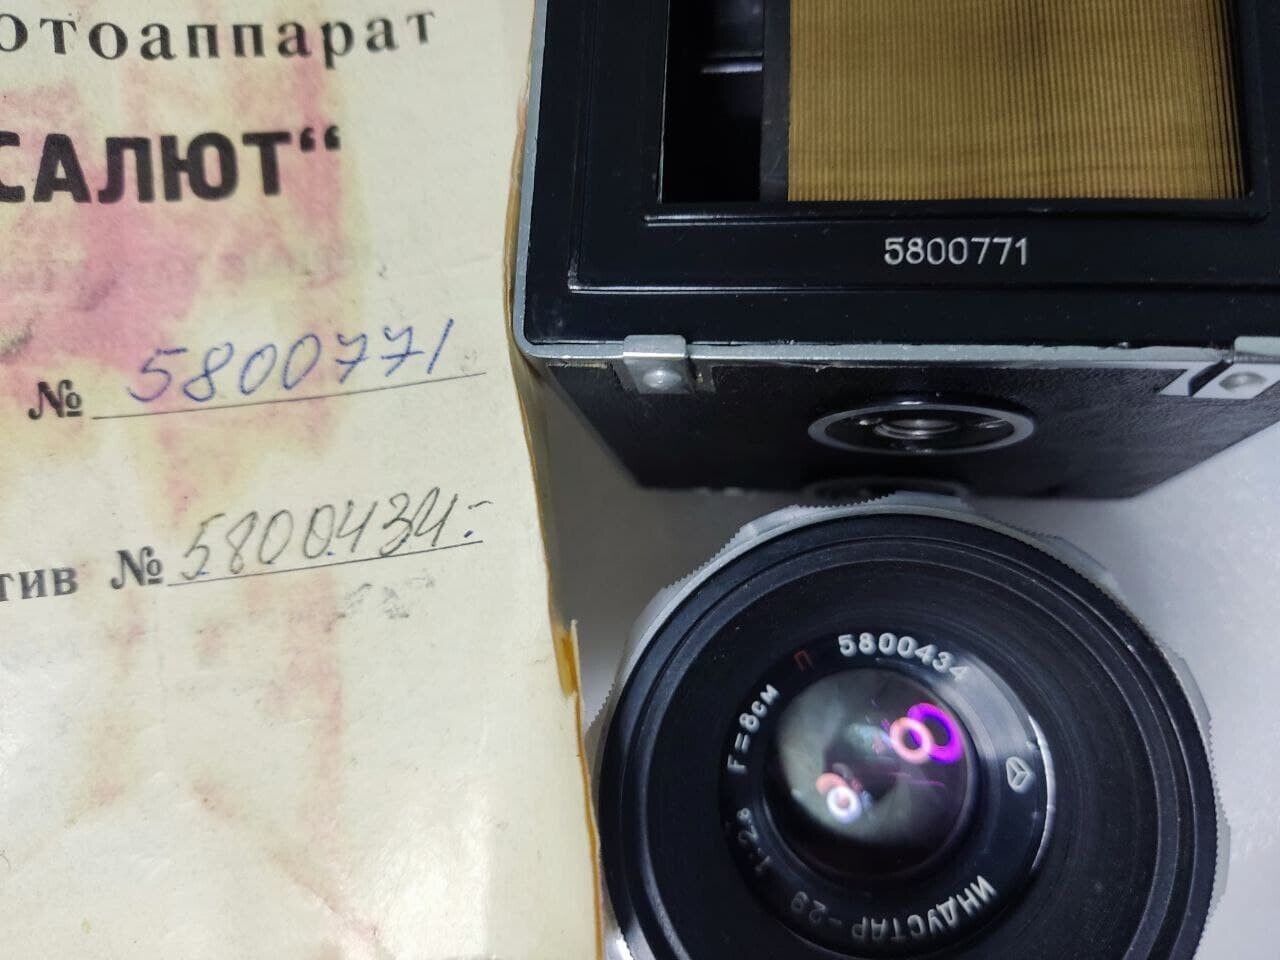 Very rare 1958 Salut Type 2 collector's item Hasselblad copy early edition Salyut